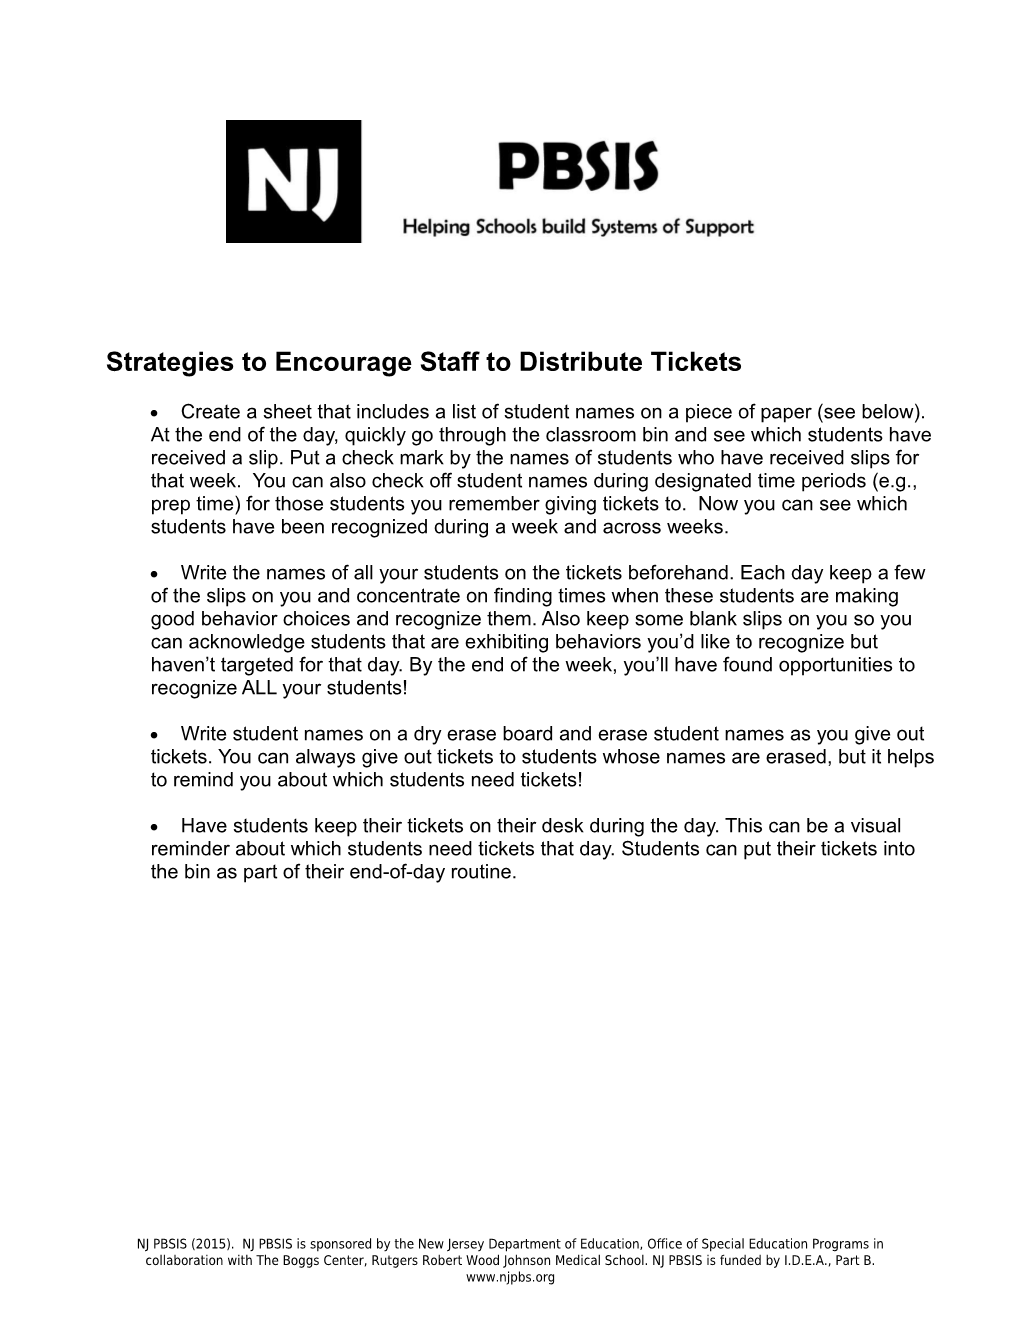 Strategies to Encourage Staff to Distribute Tickets